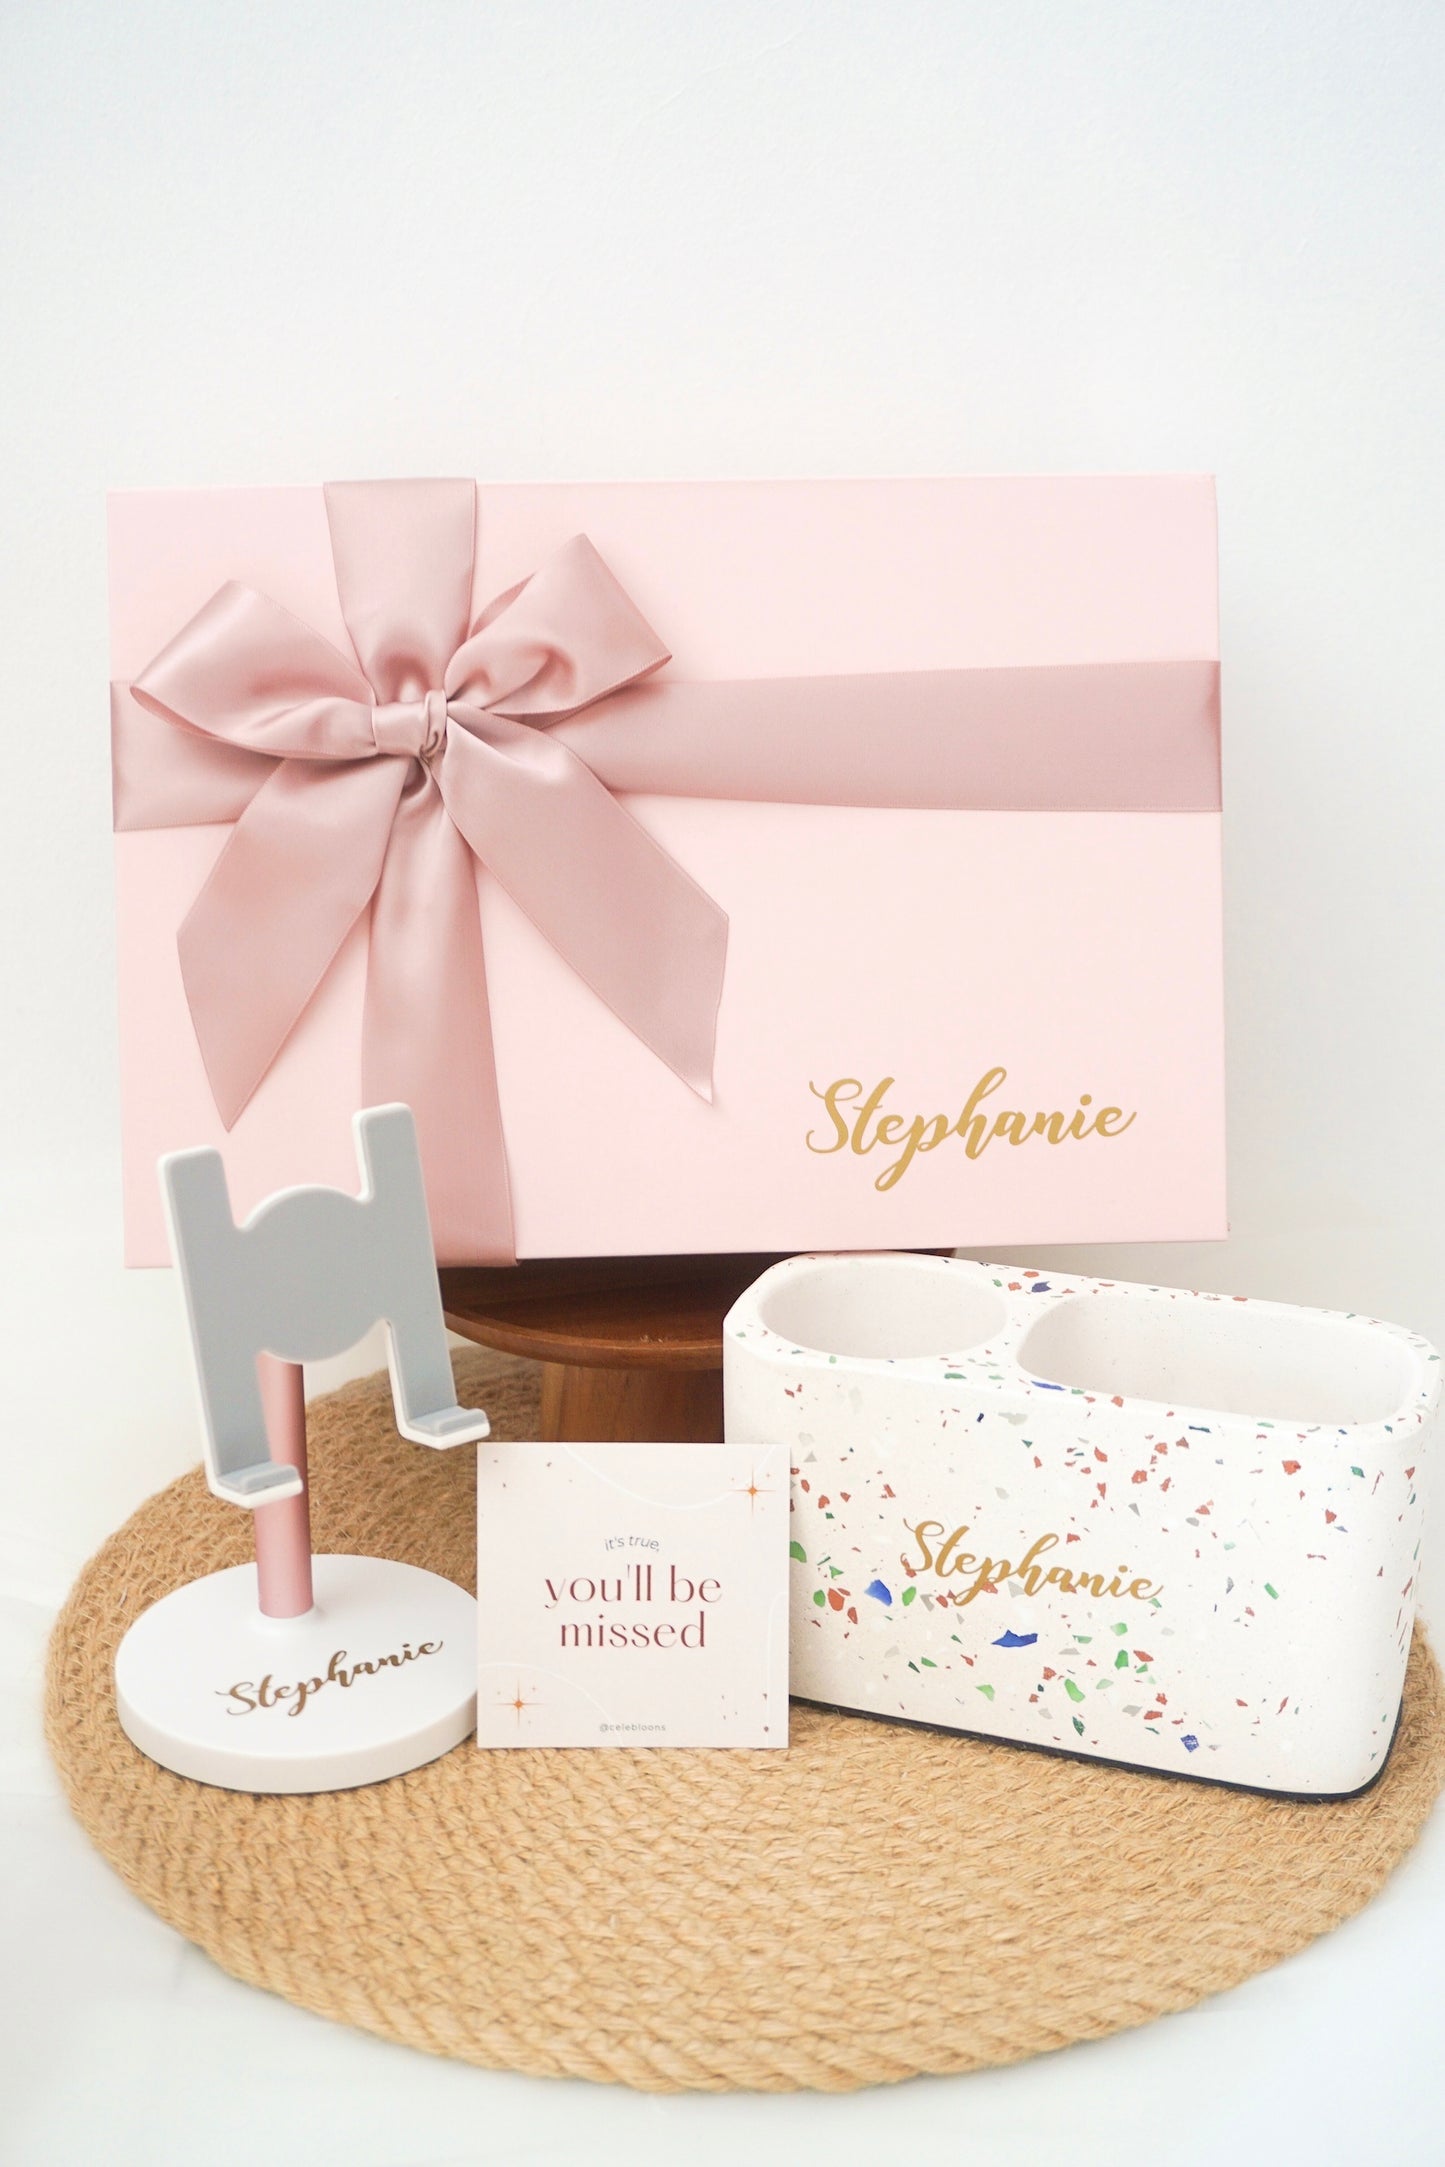 "You're Infinite" Customised Giftset